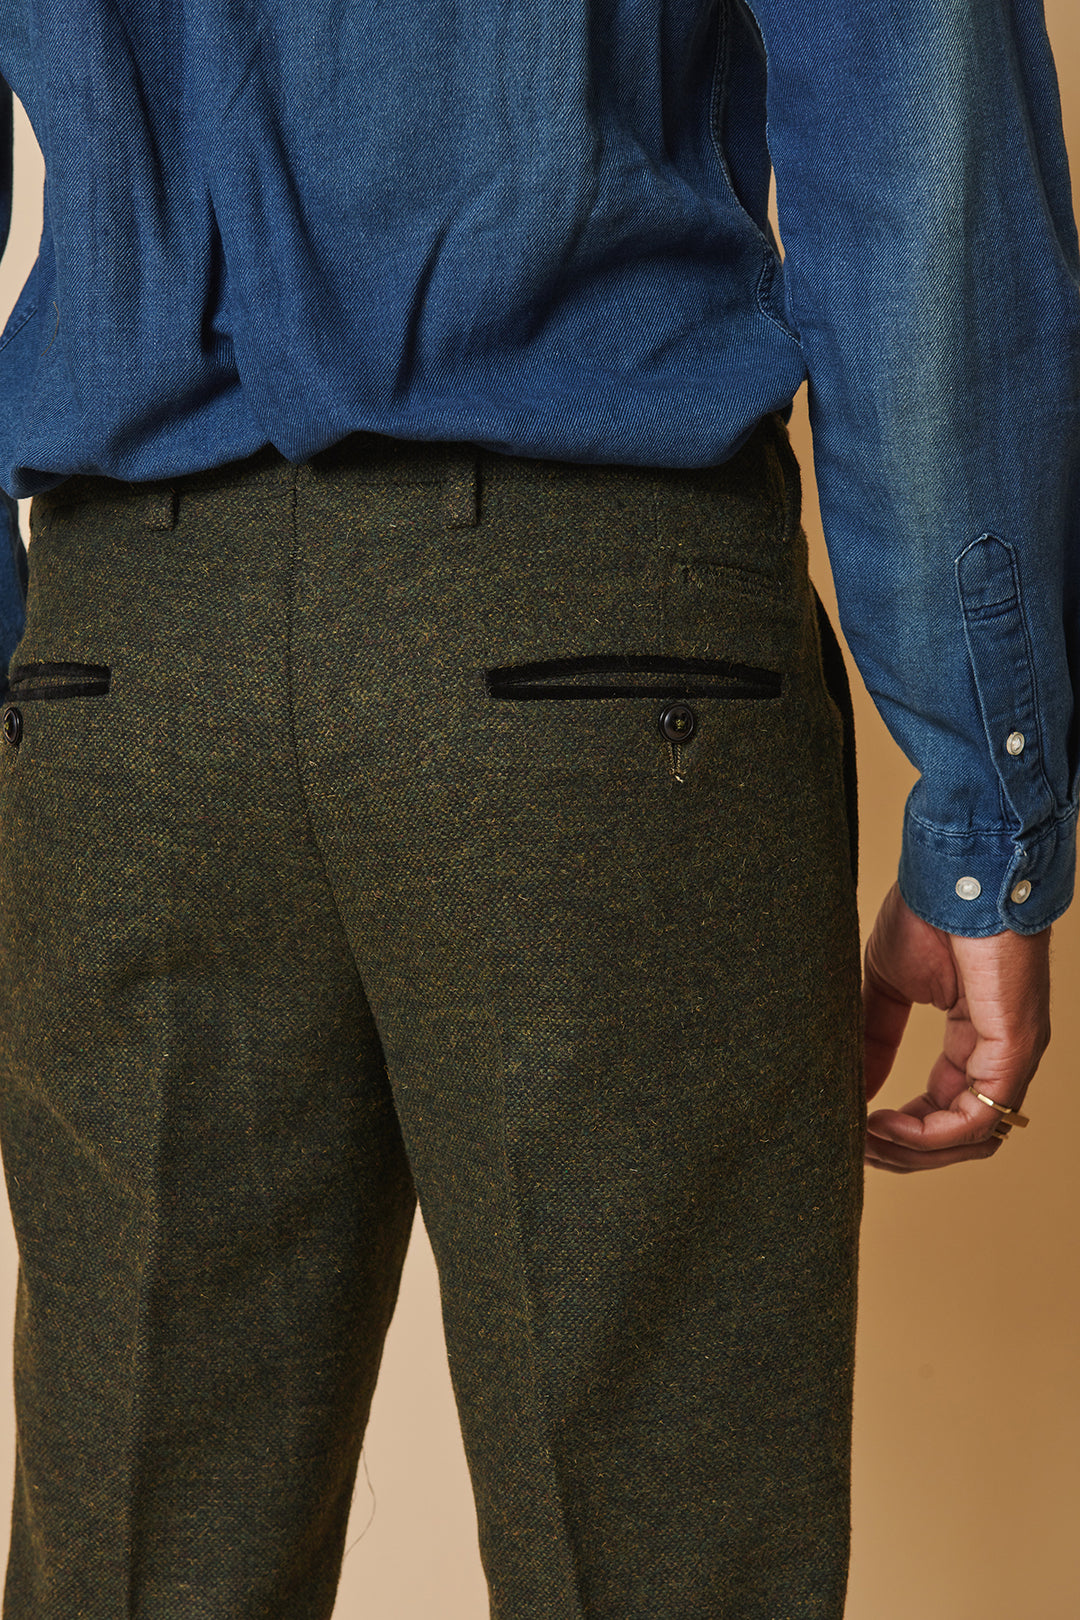 MARLOW - Olive Green Tweed Trousers